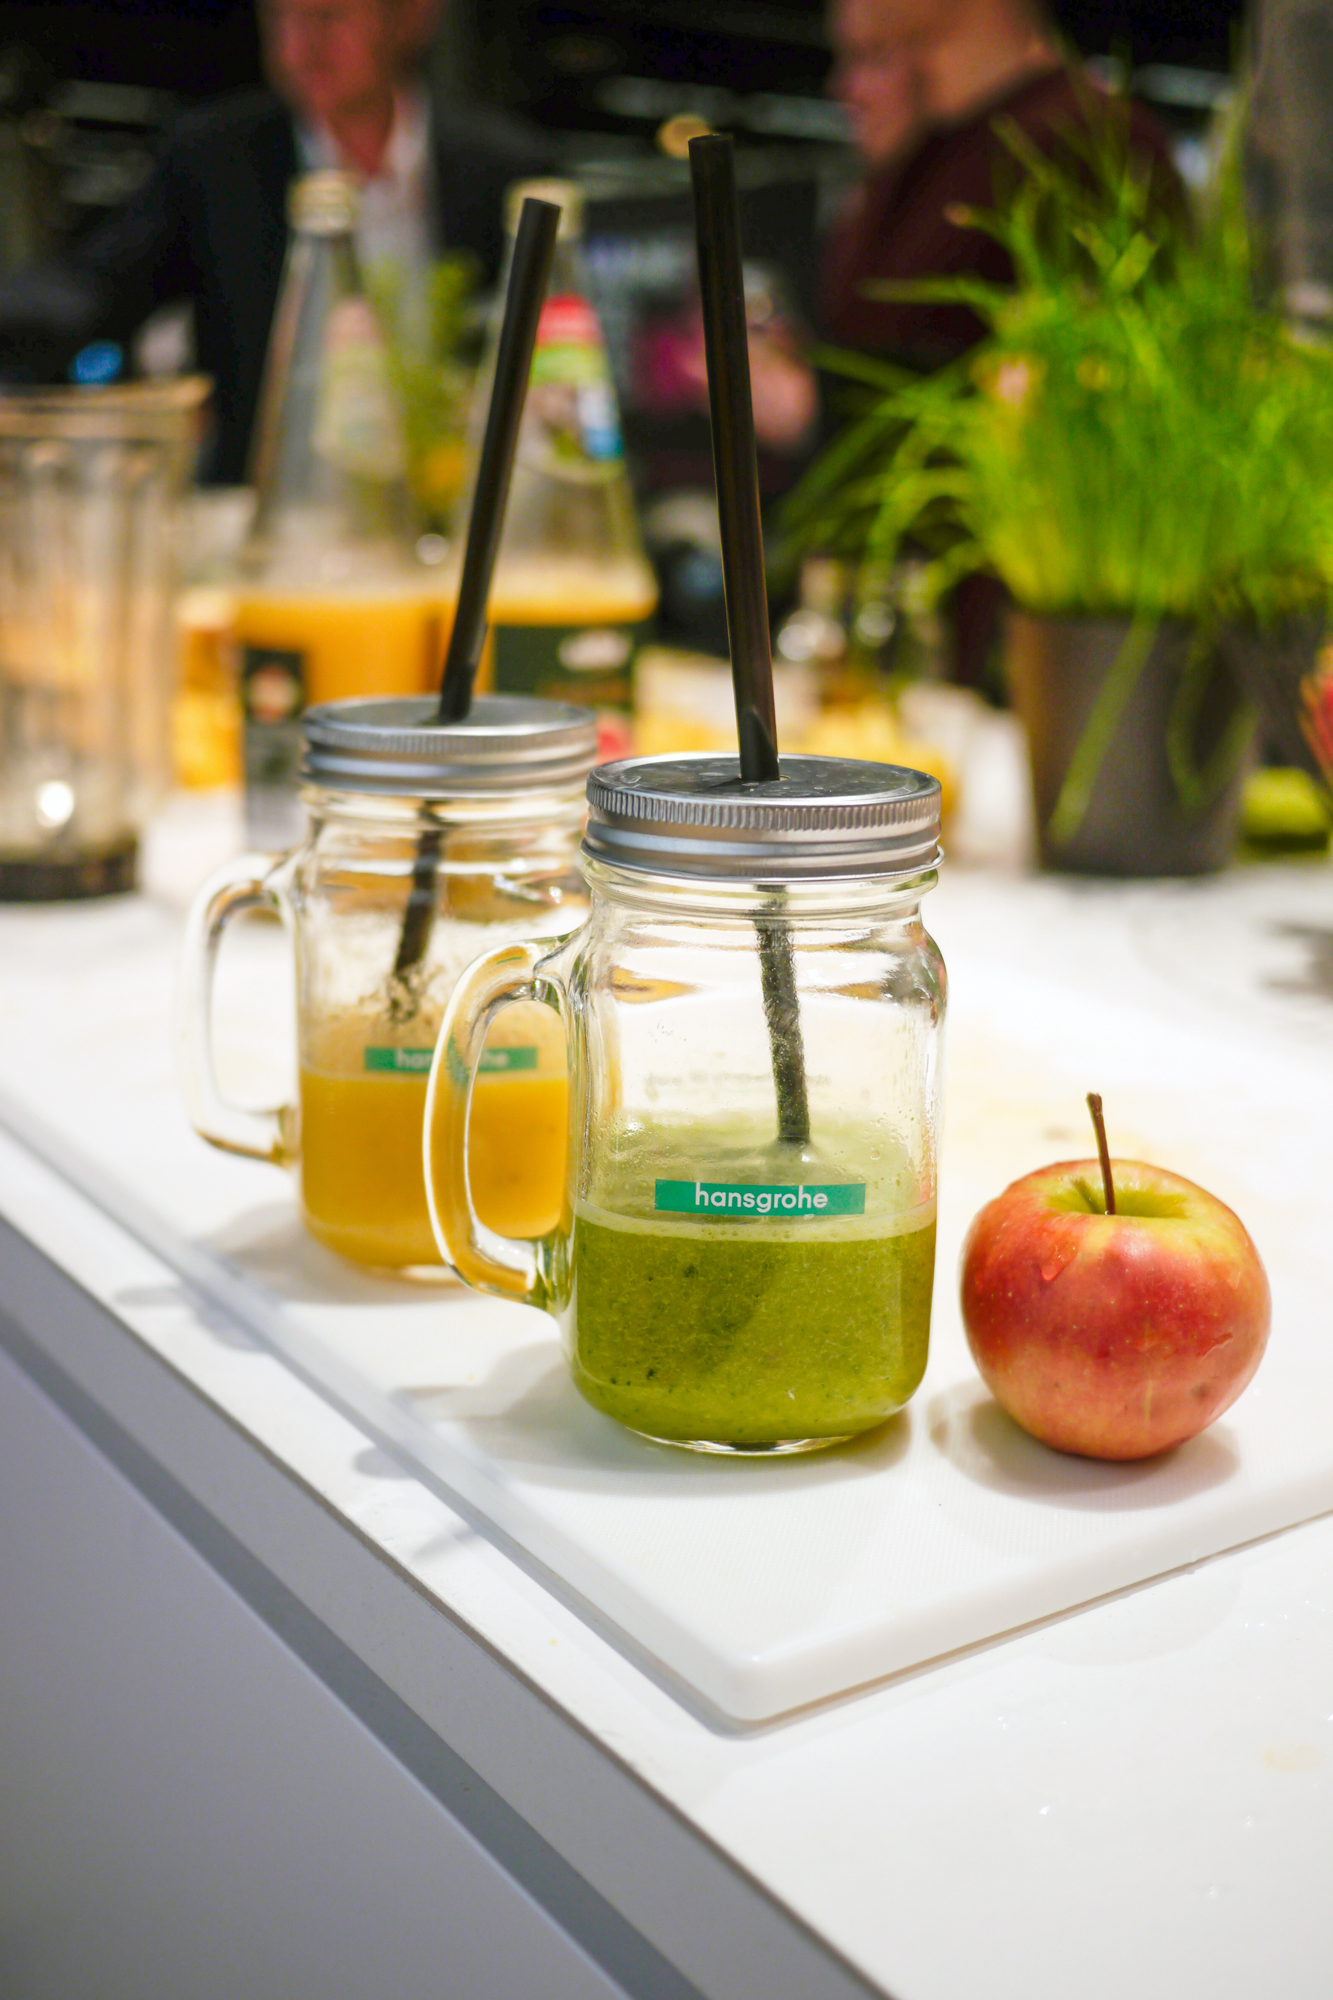 Hansgrohe Smoothies